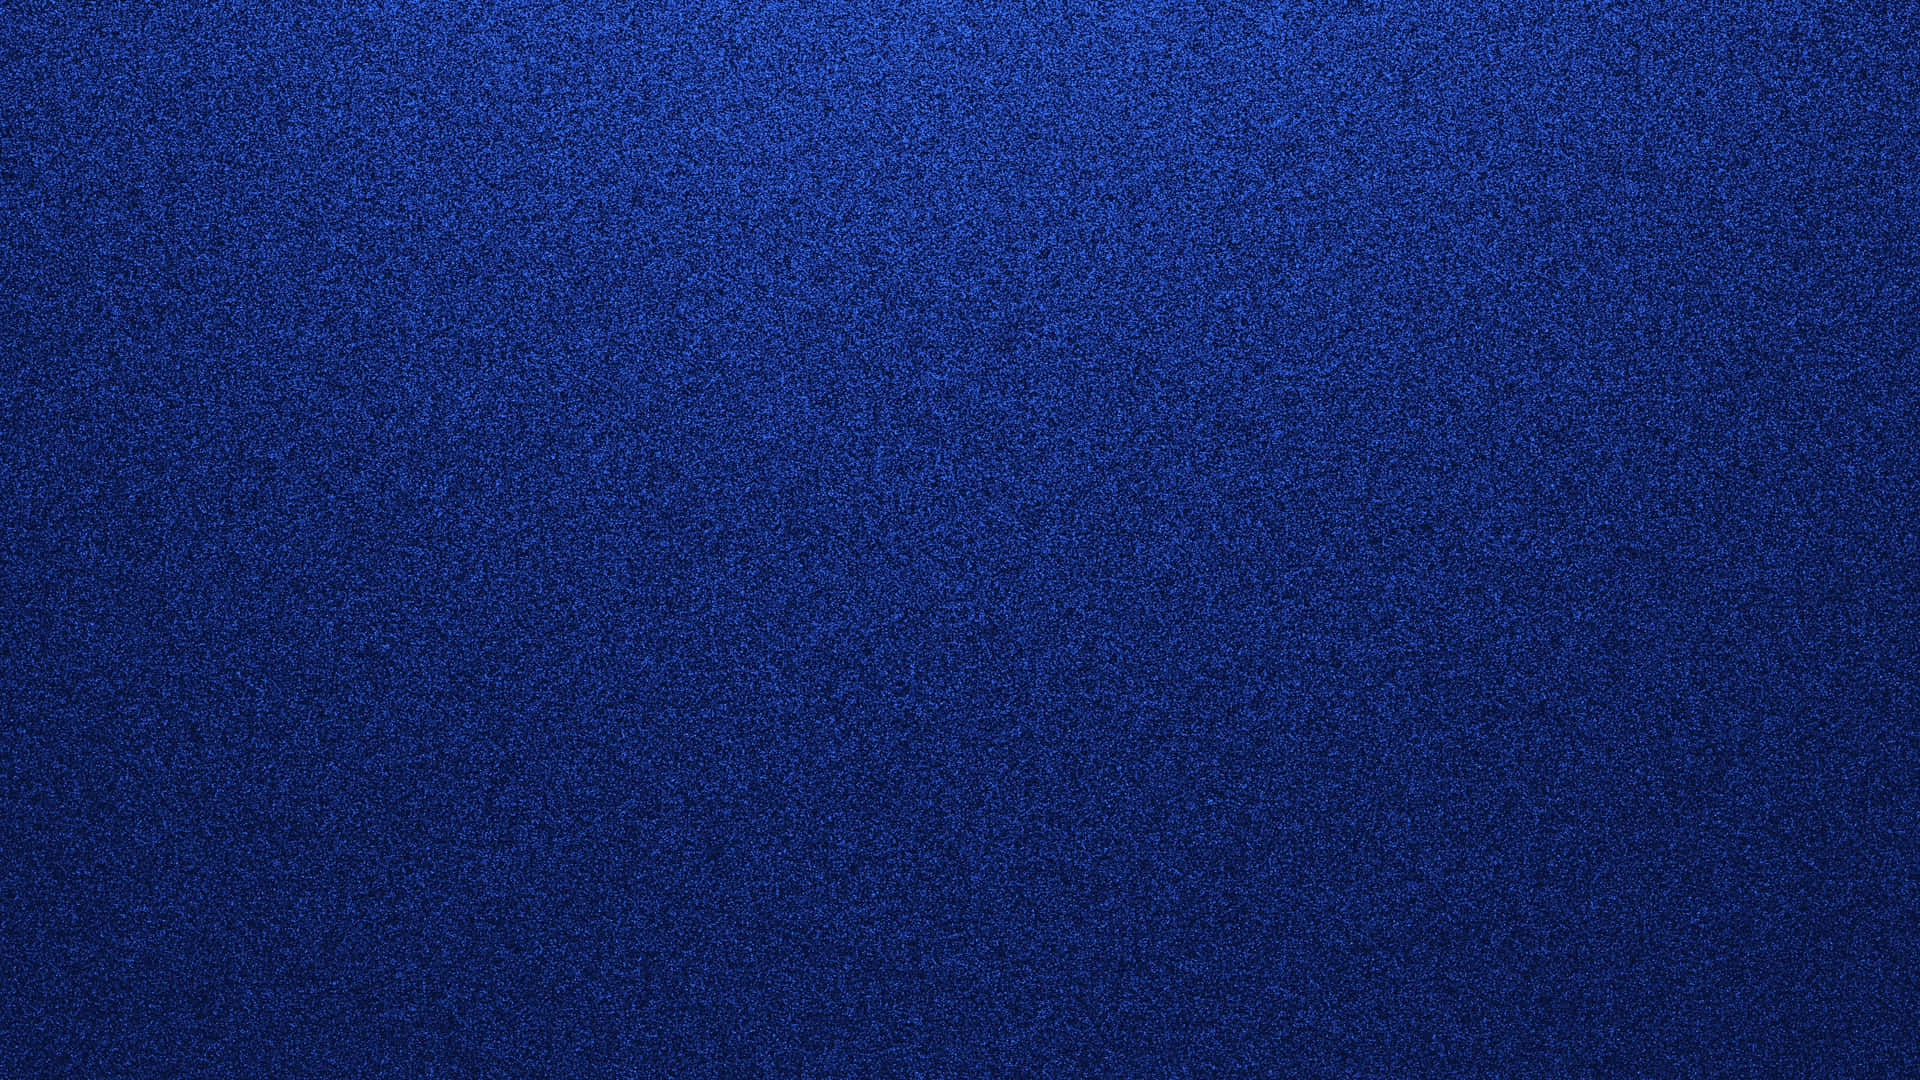 Abstract Blue Texture Art in High Resolution